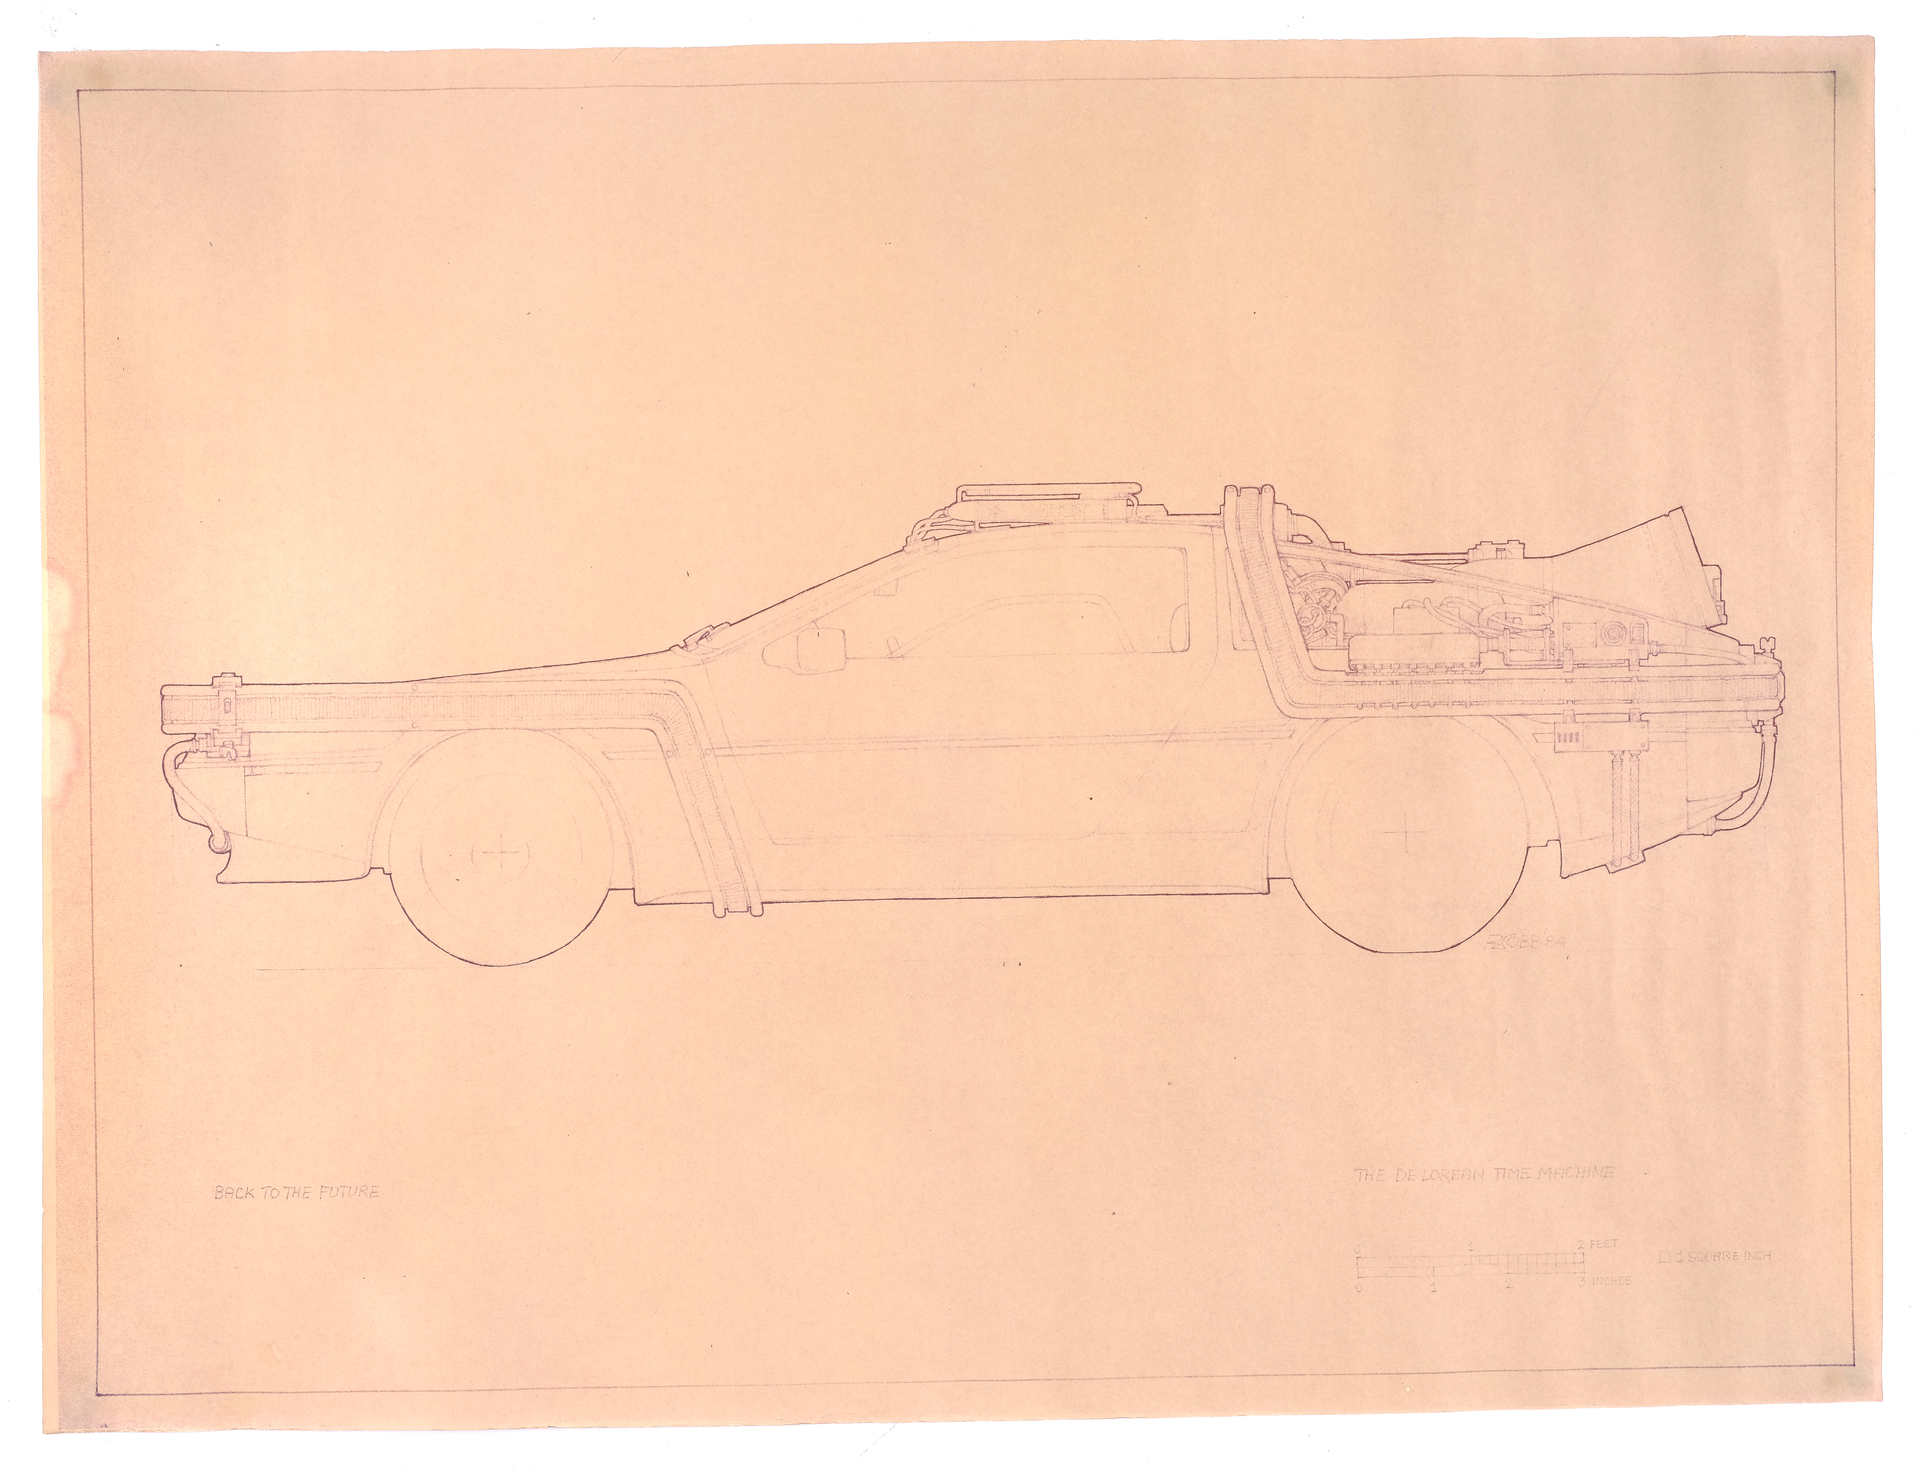 BACK TO THE FUTURE - Pair of Printed Ron Cobb DeLorean Time Machine Blueprints - Image 2 of 4